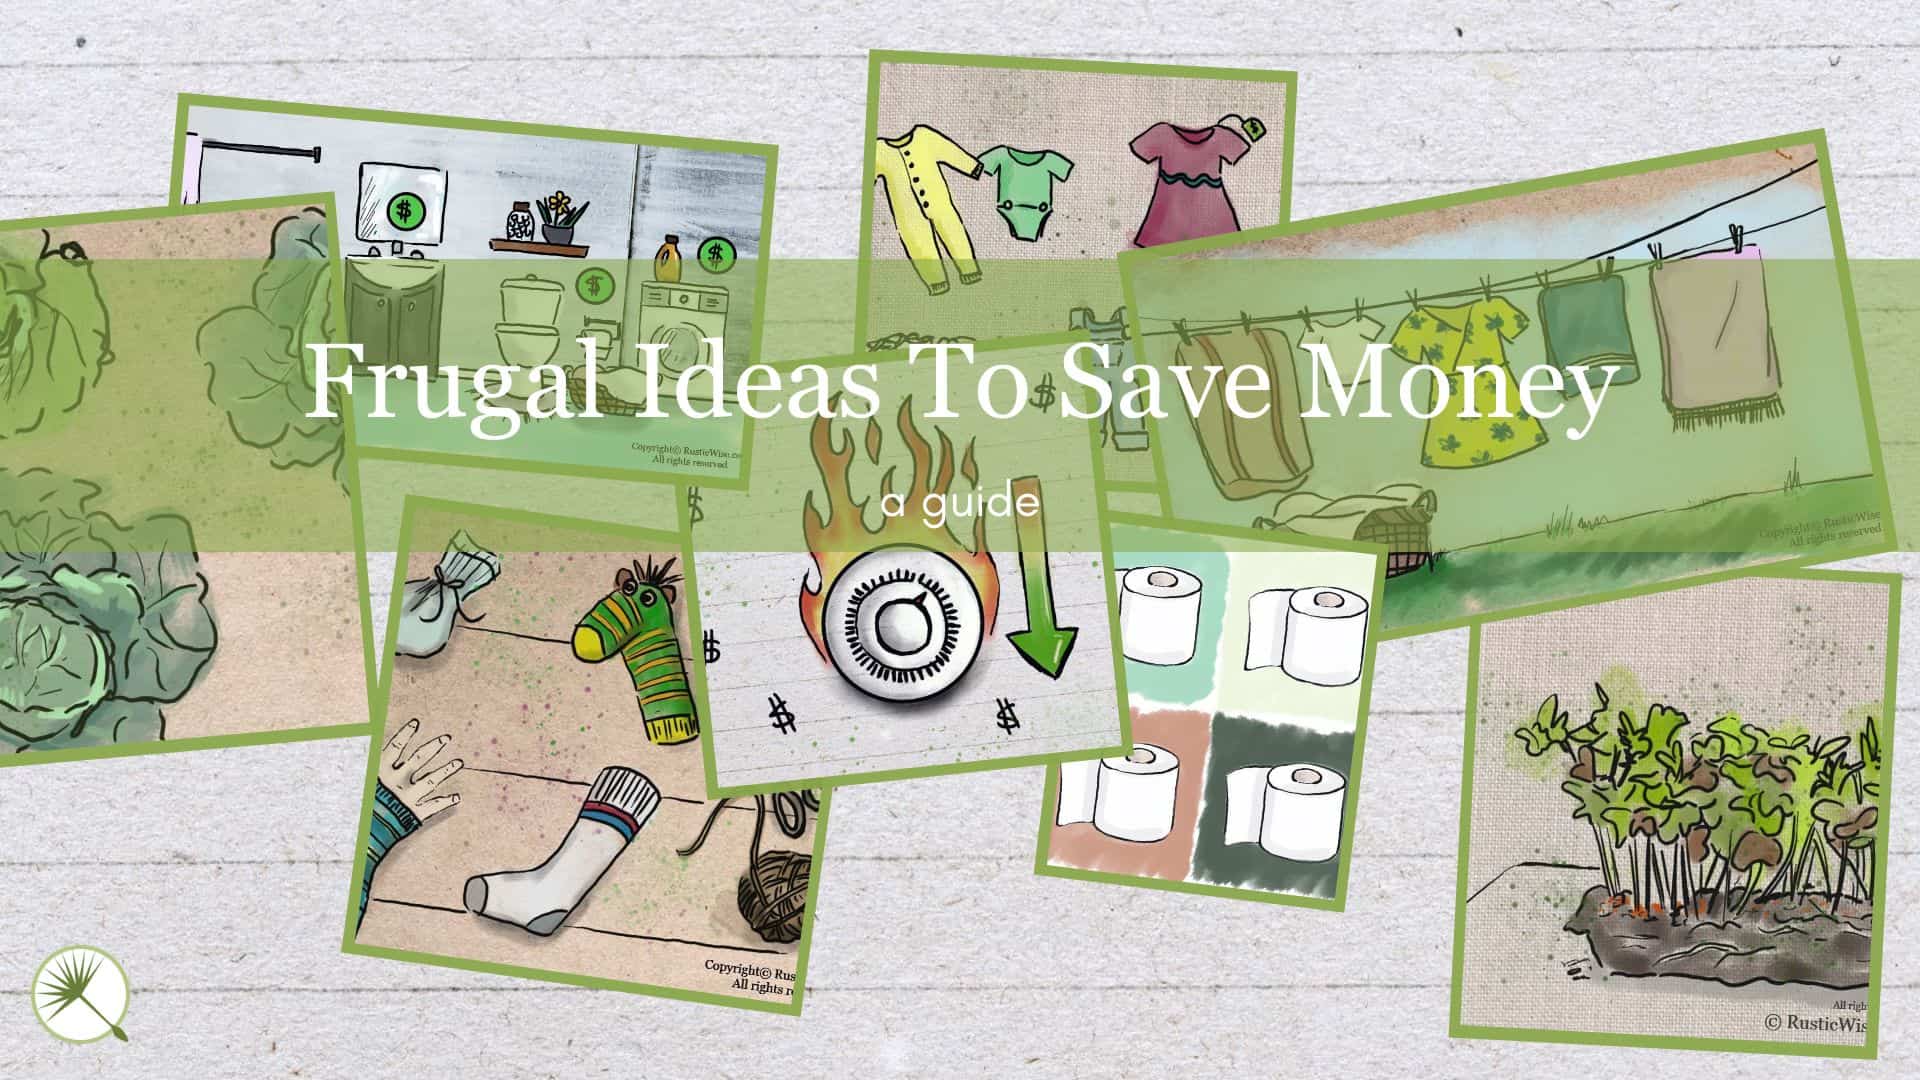 RusticWise.com - Frugal Ideas To Save Money